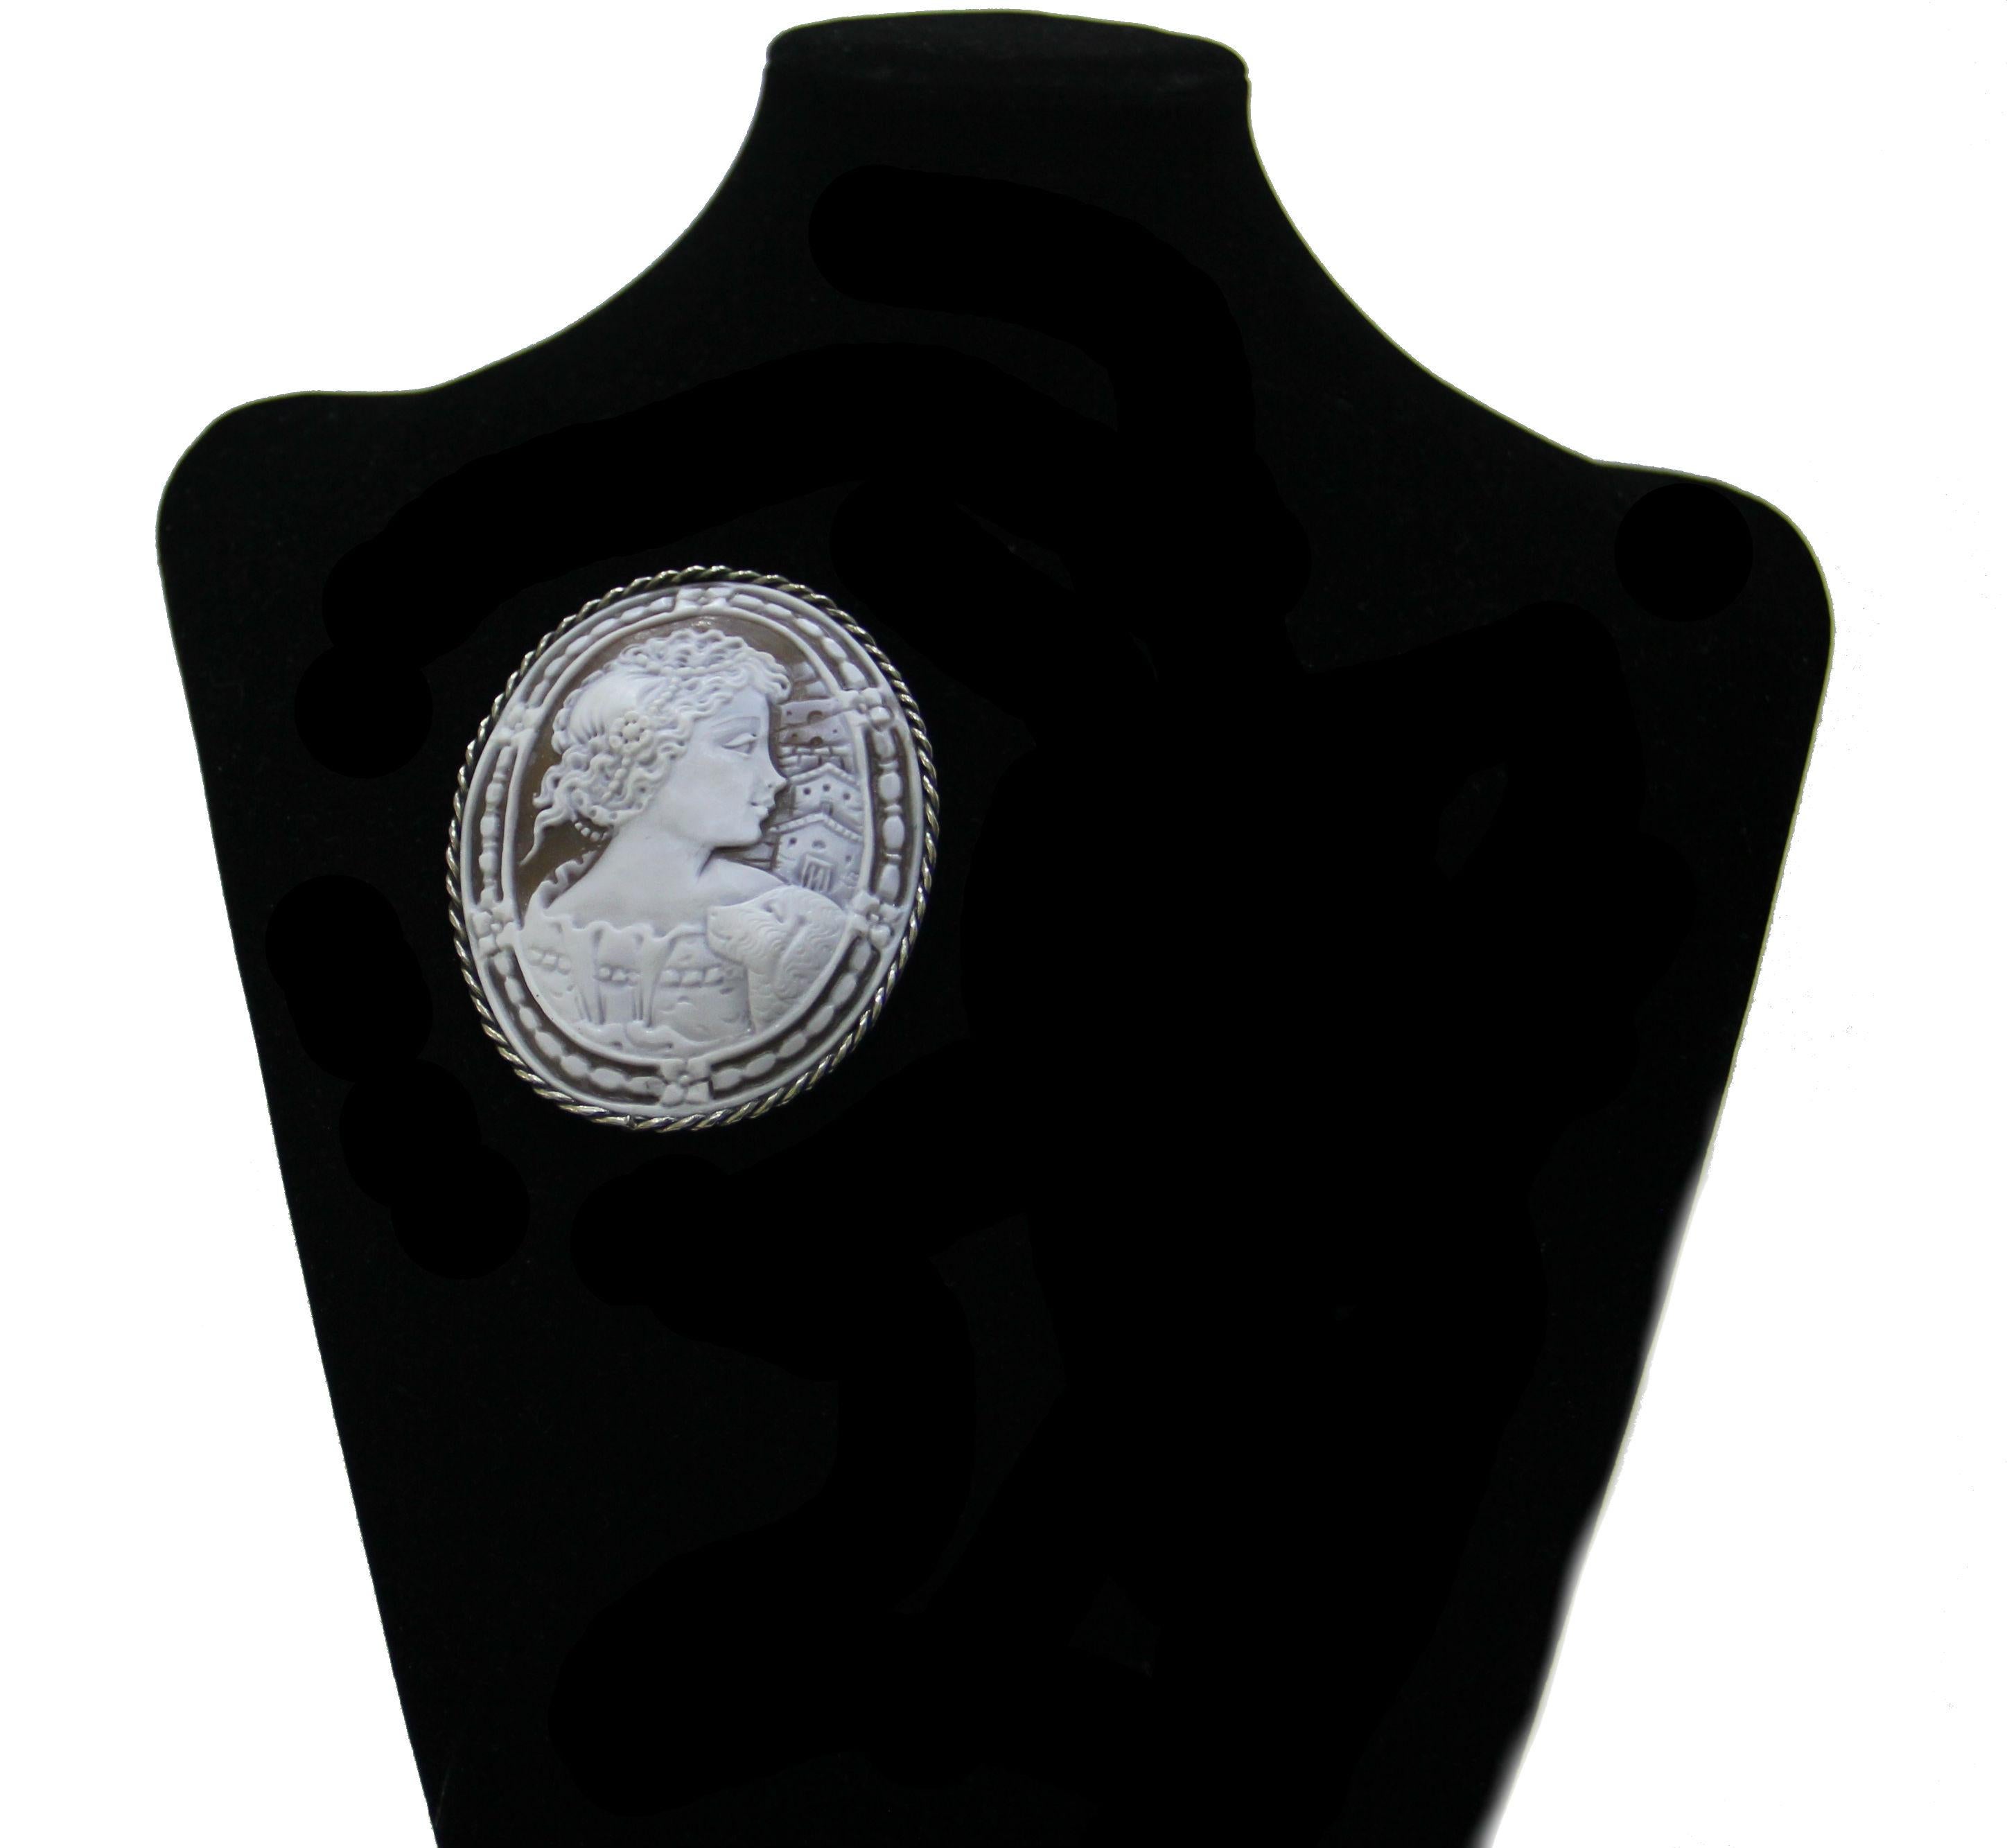 Handcraft Cameo 800 Thousandths Silver Brooch and Pendant Necklace For Sale 2